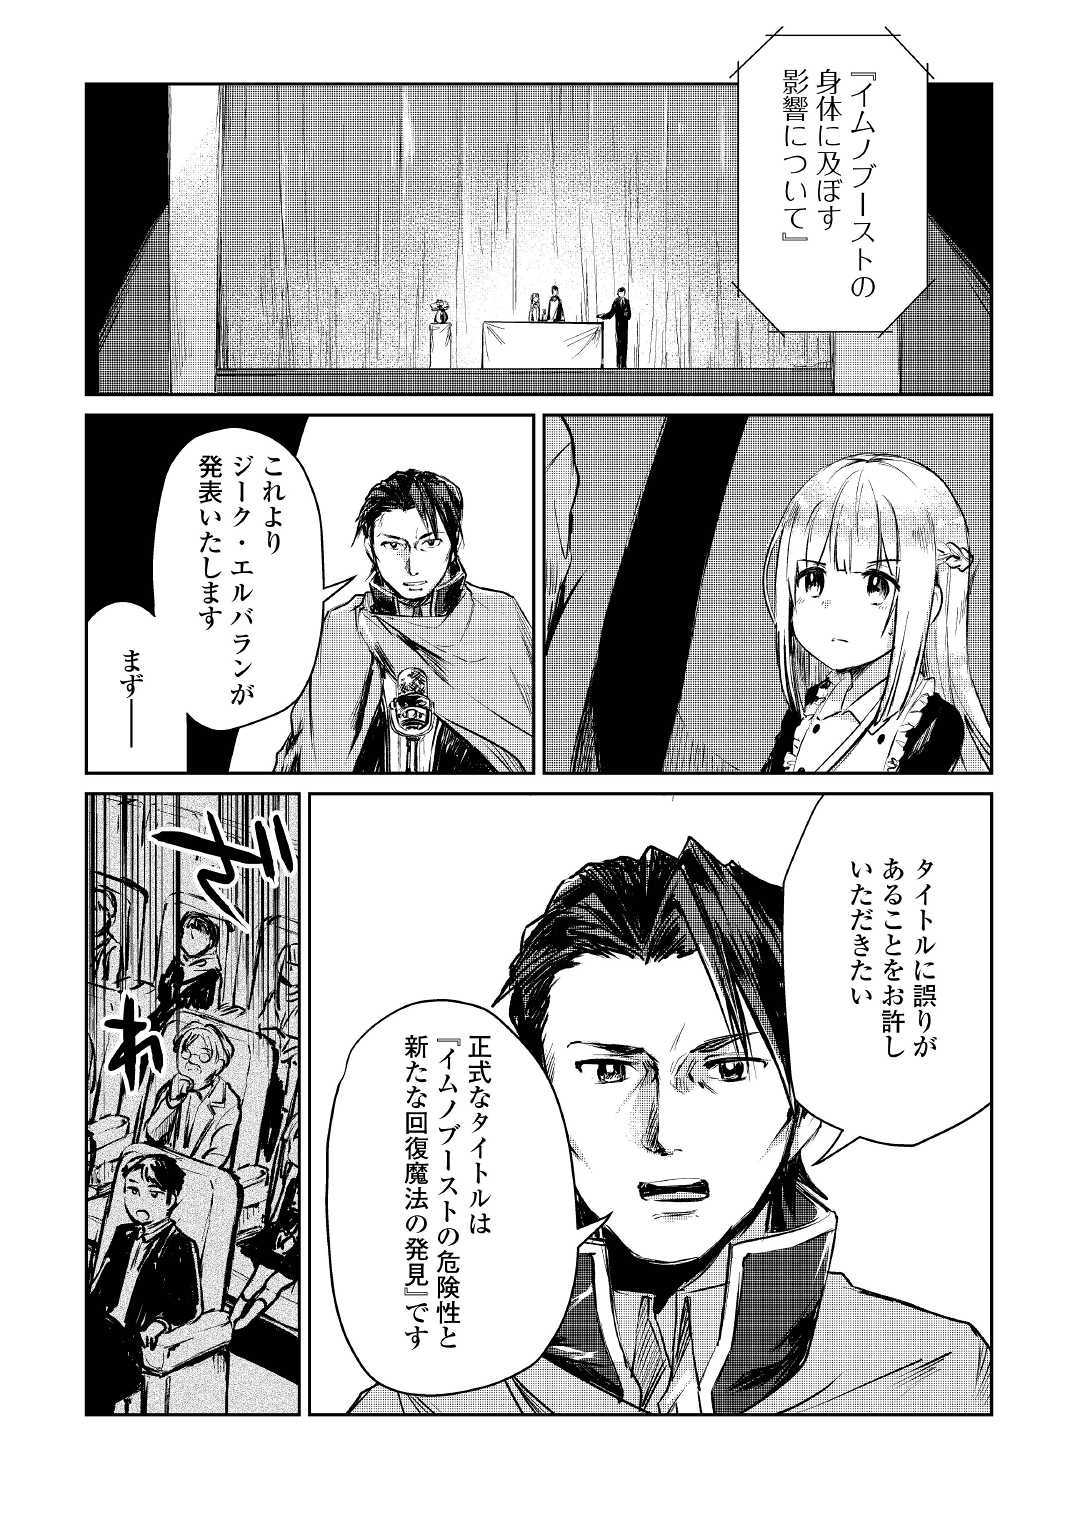 The Former Structural Researcher’s Story of Otherworldly Adventure 第9話 - Page 18